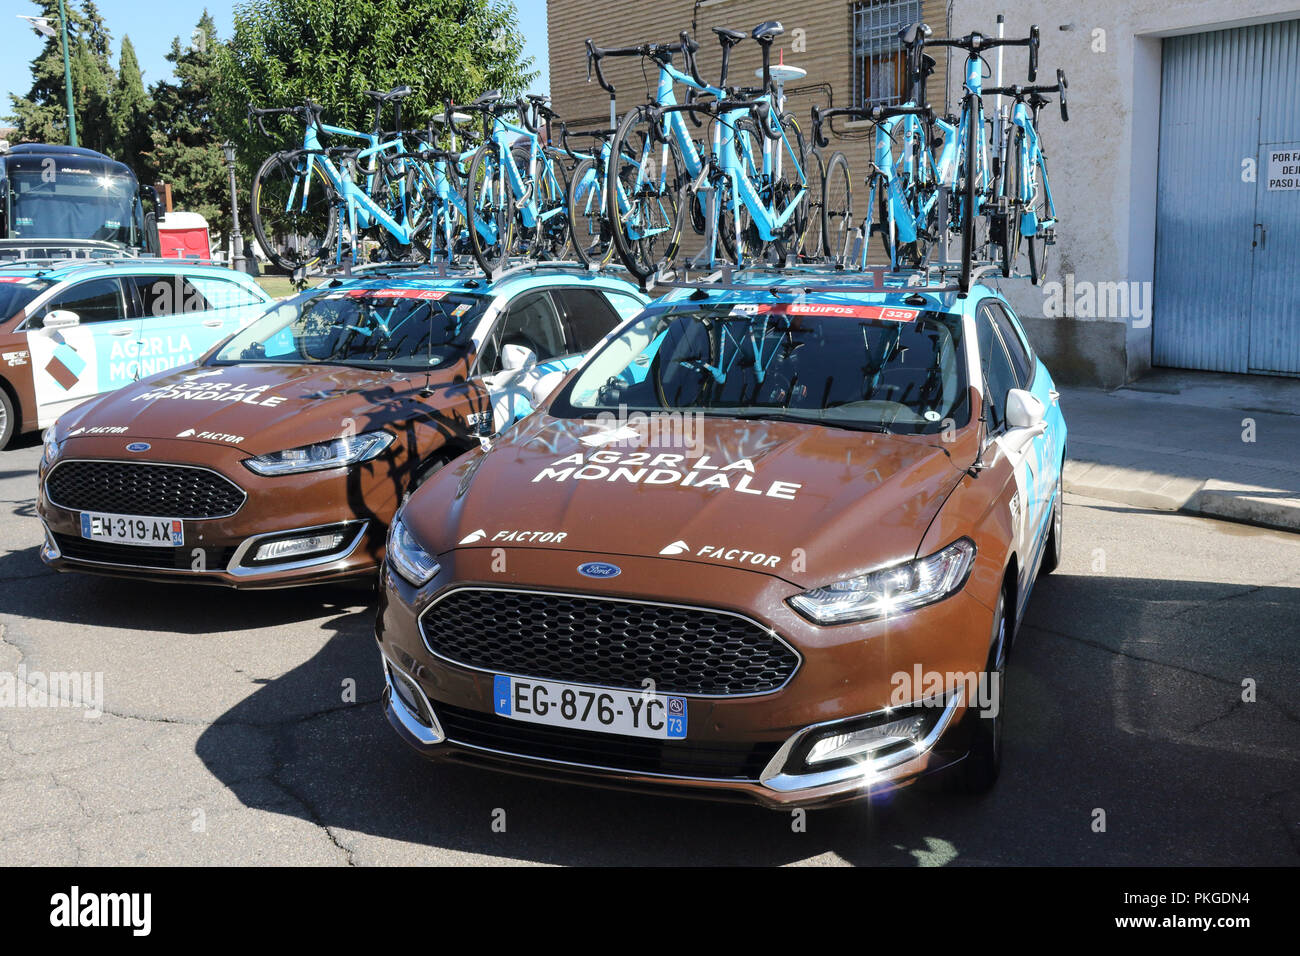 Ejea de los Caballeros, Spain. 13th Sep, 2018. The AG2R LA MONDIALE team cars parked at the start of the Vuelta, with bicycles on the baggage rack.. Isacco Coccato/Alamy Live News Stock Photo